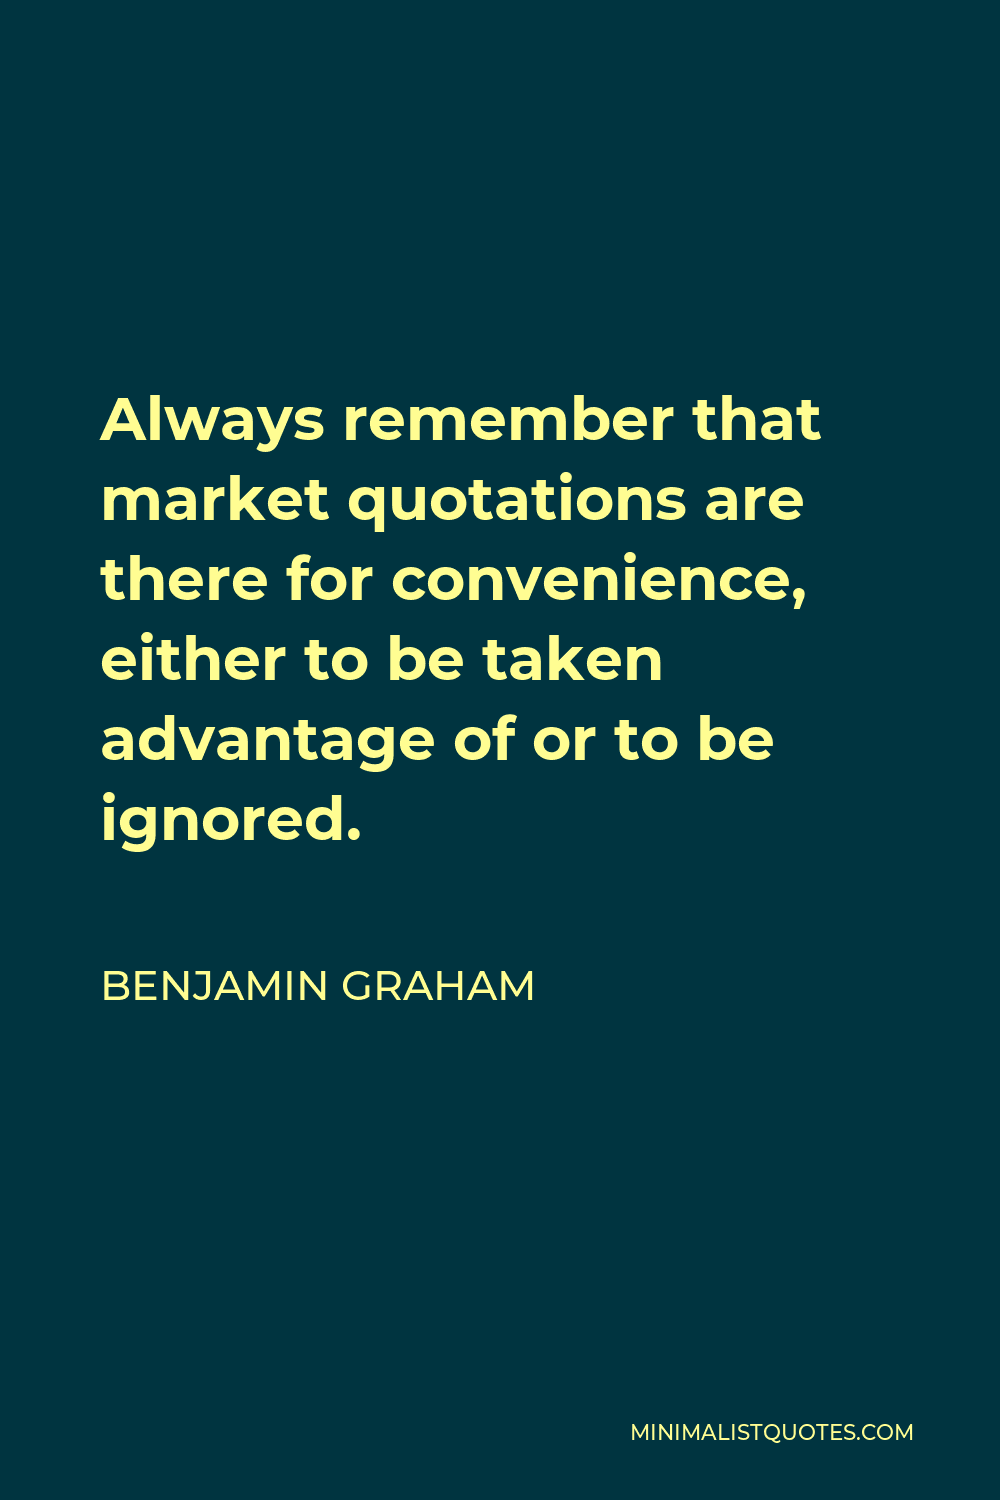 Benjamin Graham Quote - Always remember that market quotations are there for convenience, either to be taken advantage of or to be ignored.